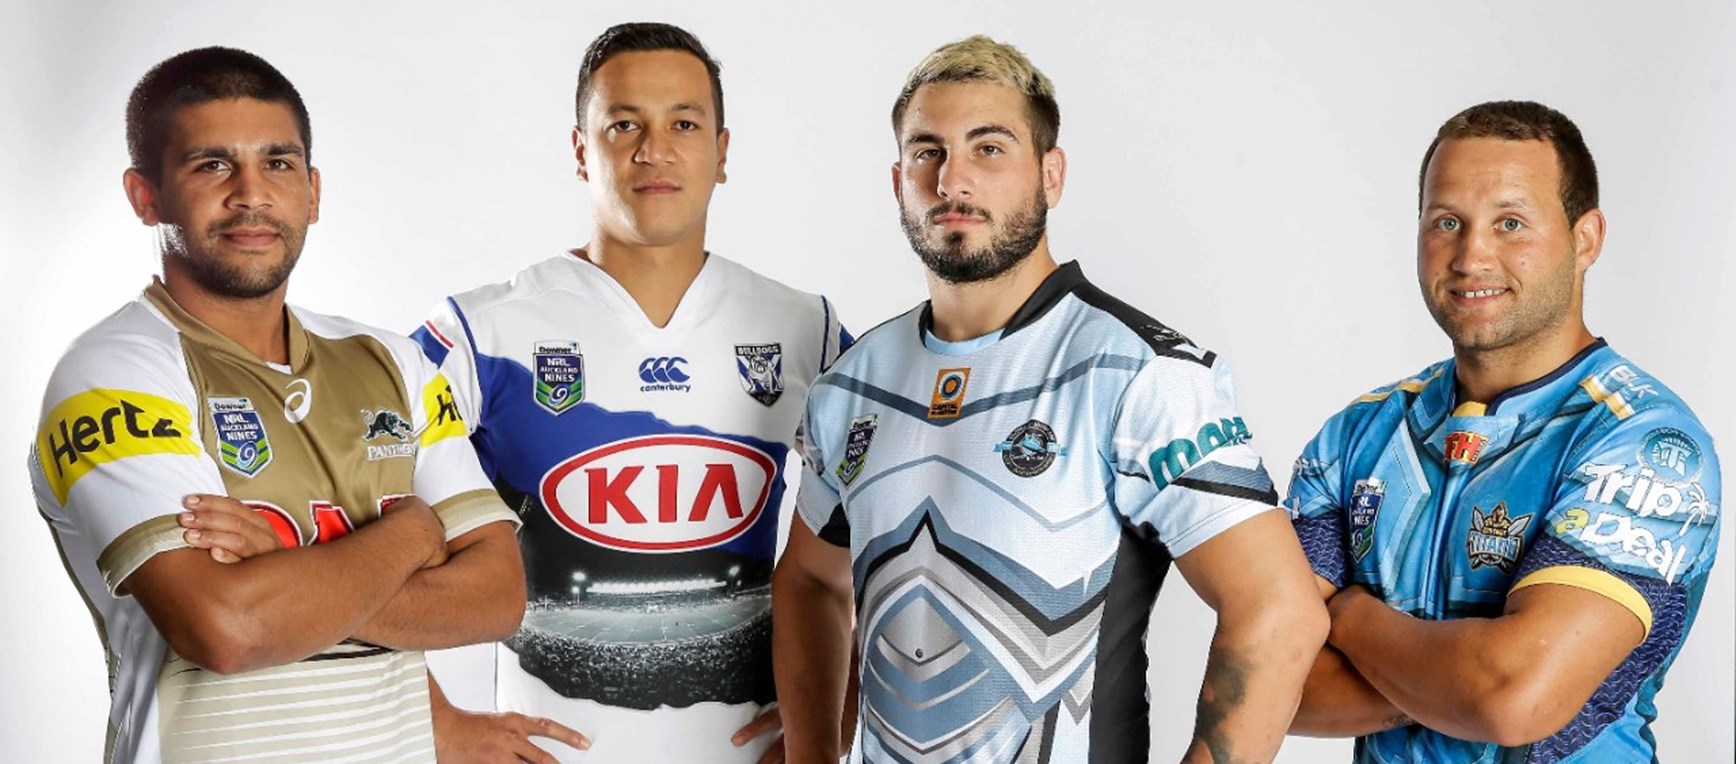 PHOTO GALLERY: NRL Auckland Nines Jersey Launch